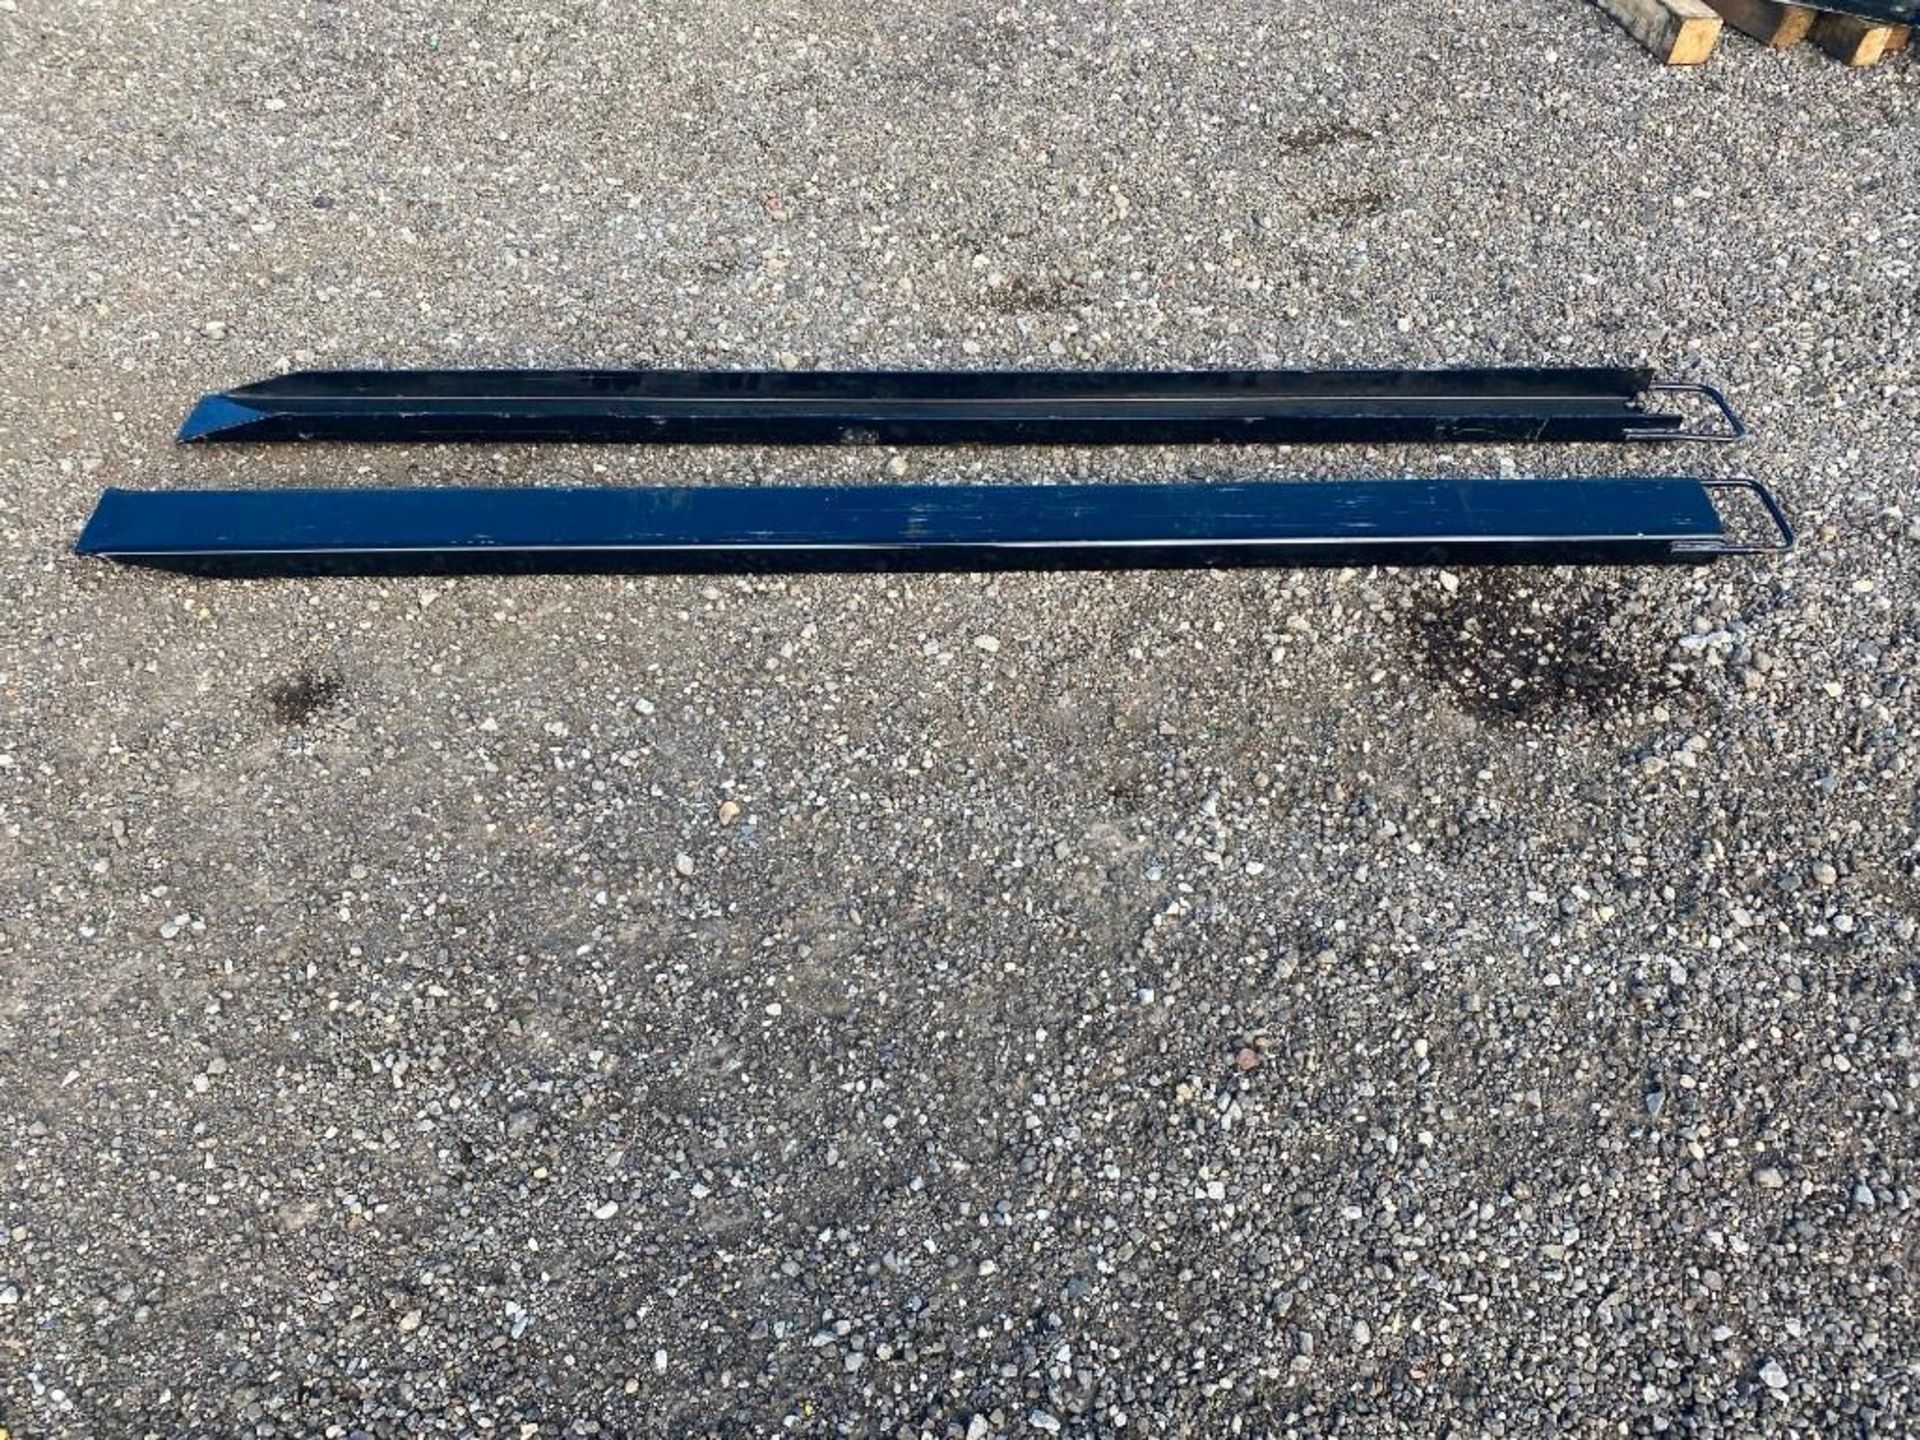 New 84" Light Duty Fork Extensions* - Image 4 of 4